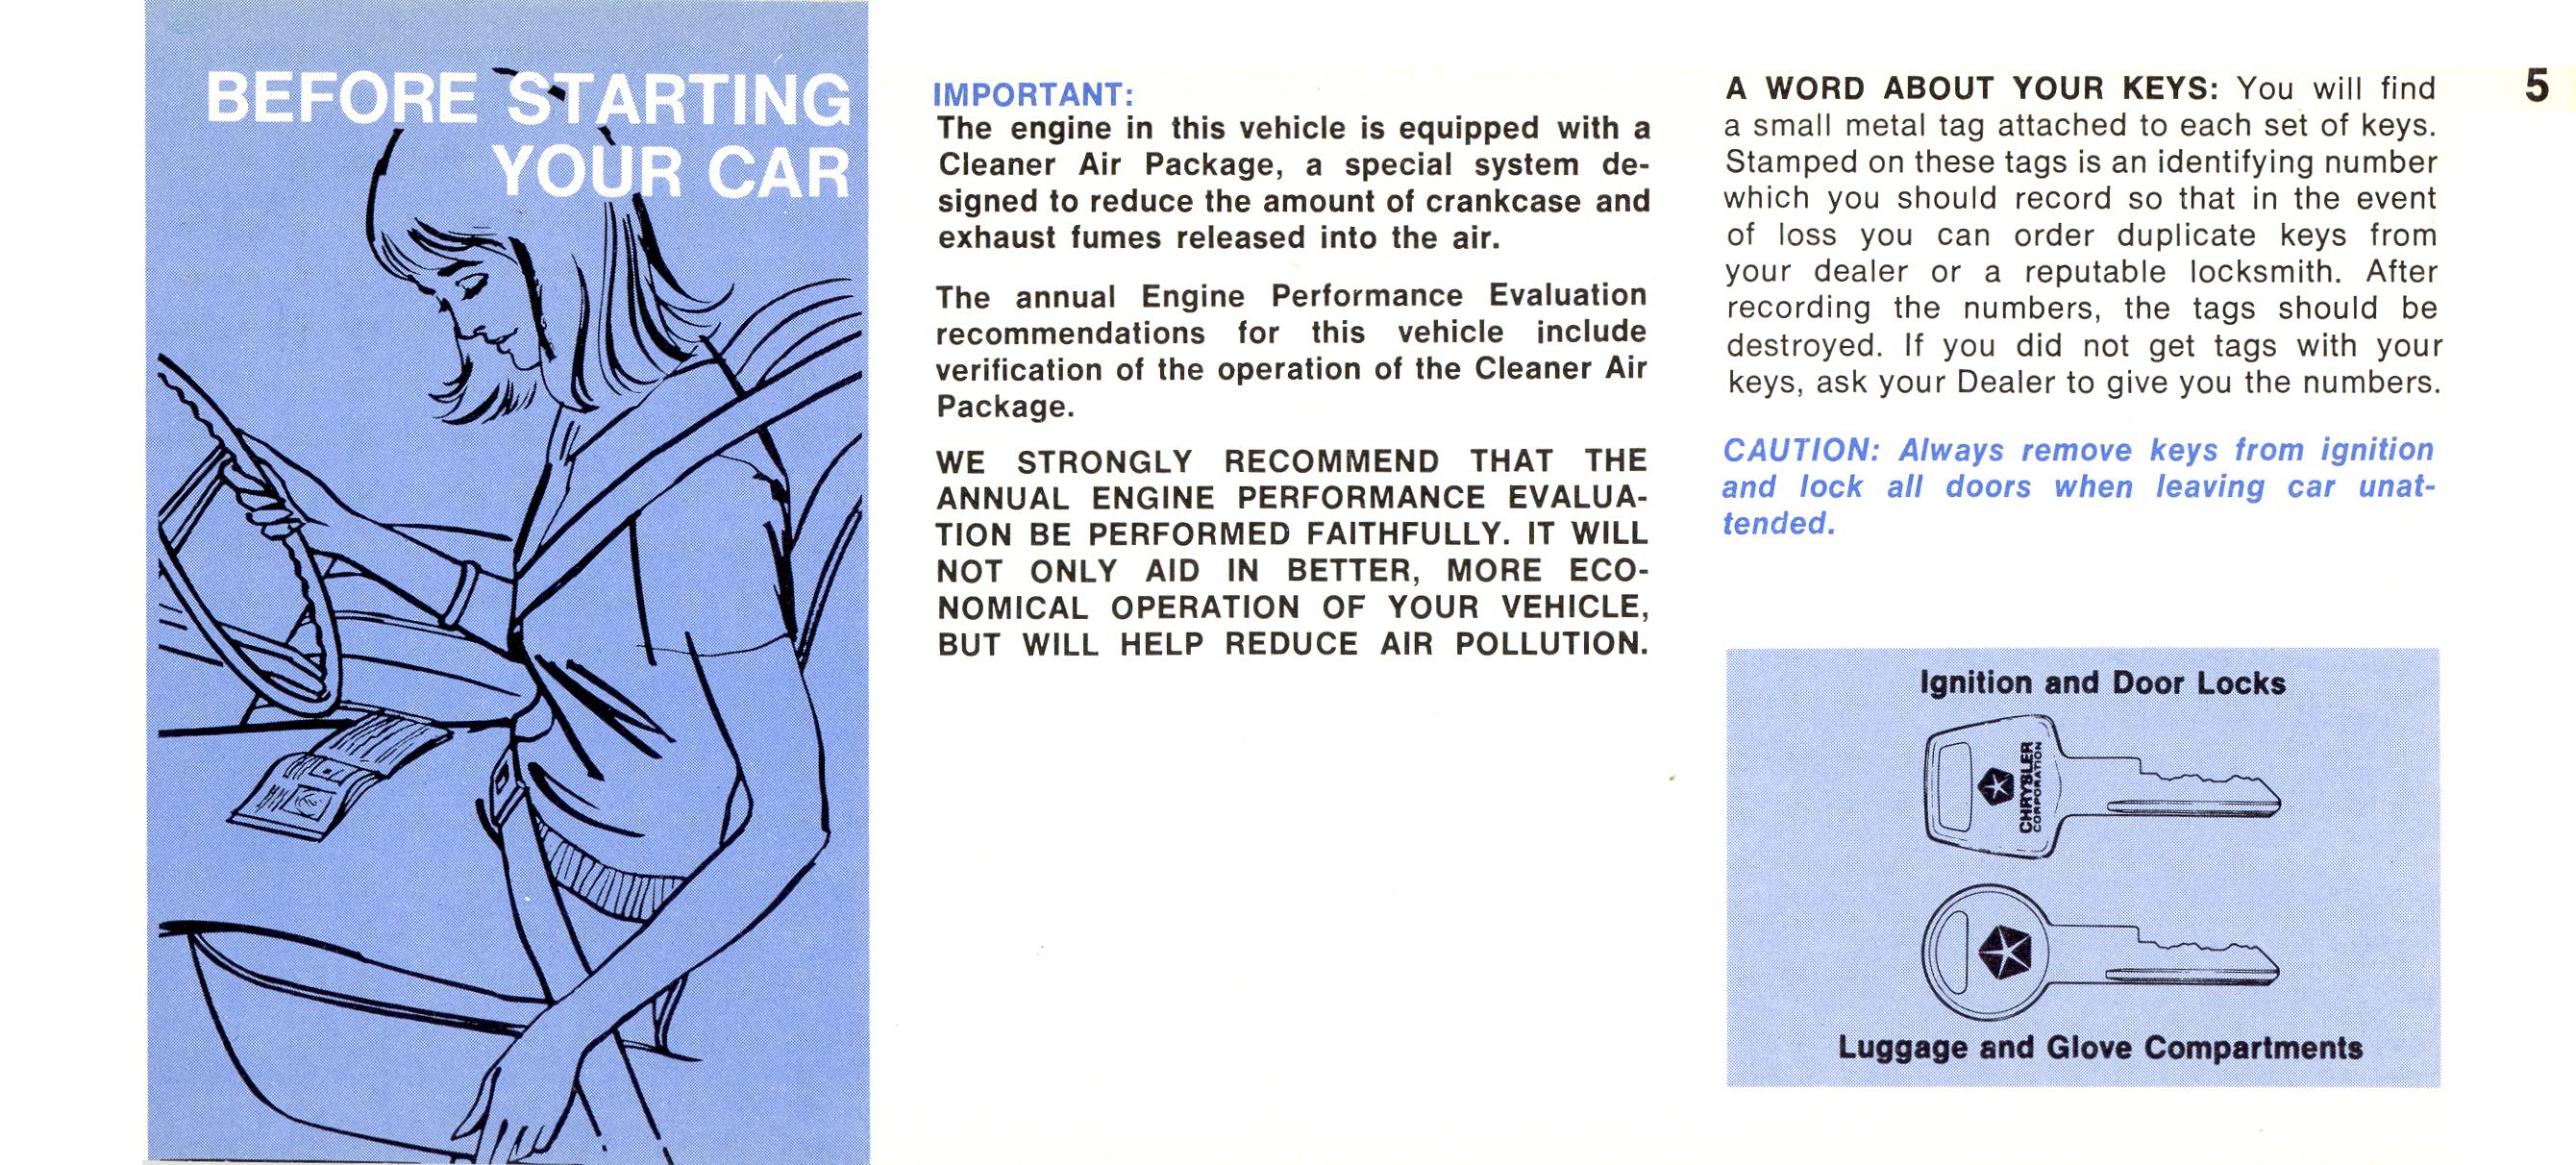 1968 Chrysler Imperial Owners Manual Page 45